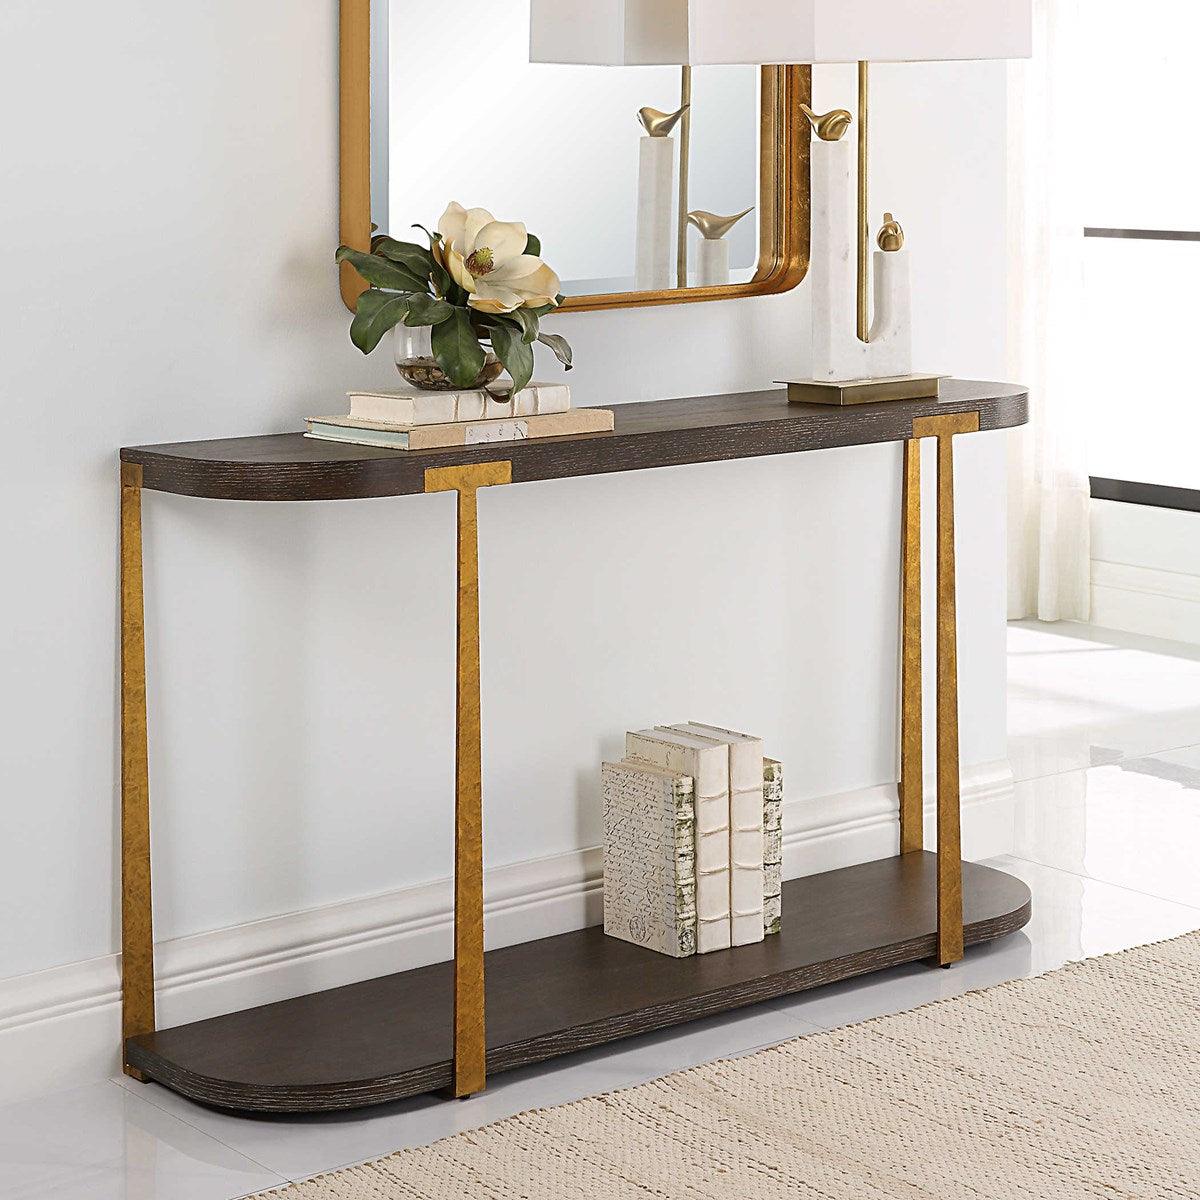 The Uttermost - Palisade Console Table - 25556 | Montreal Lighting & Hardware